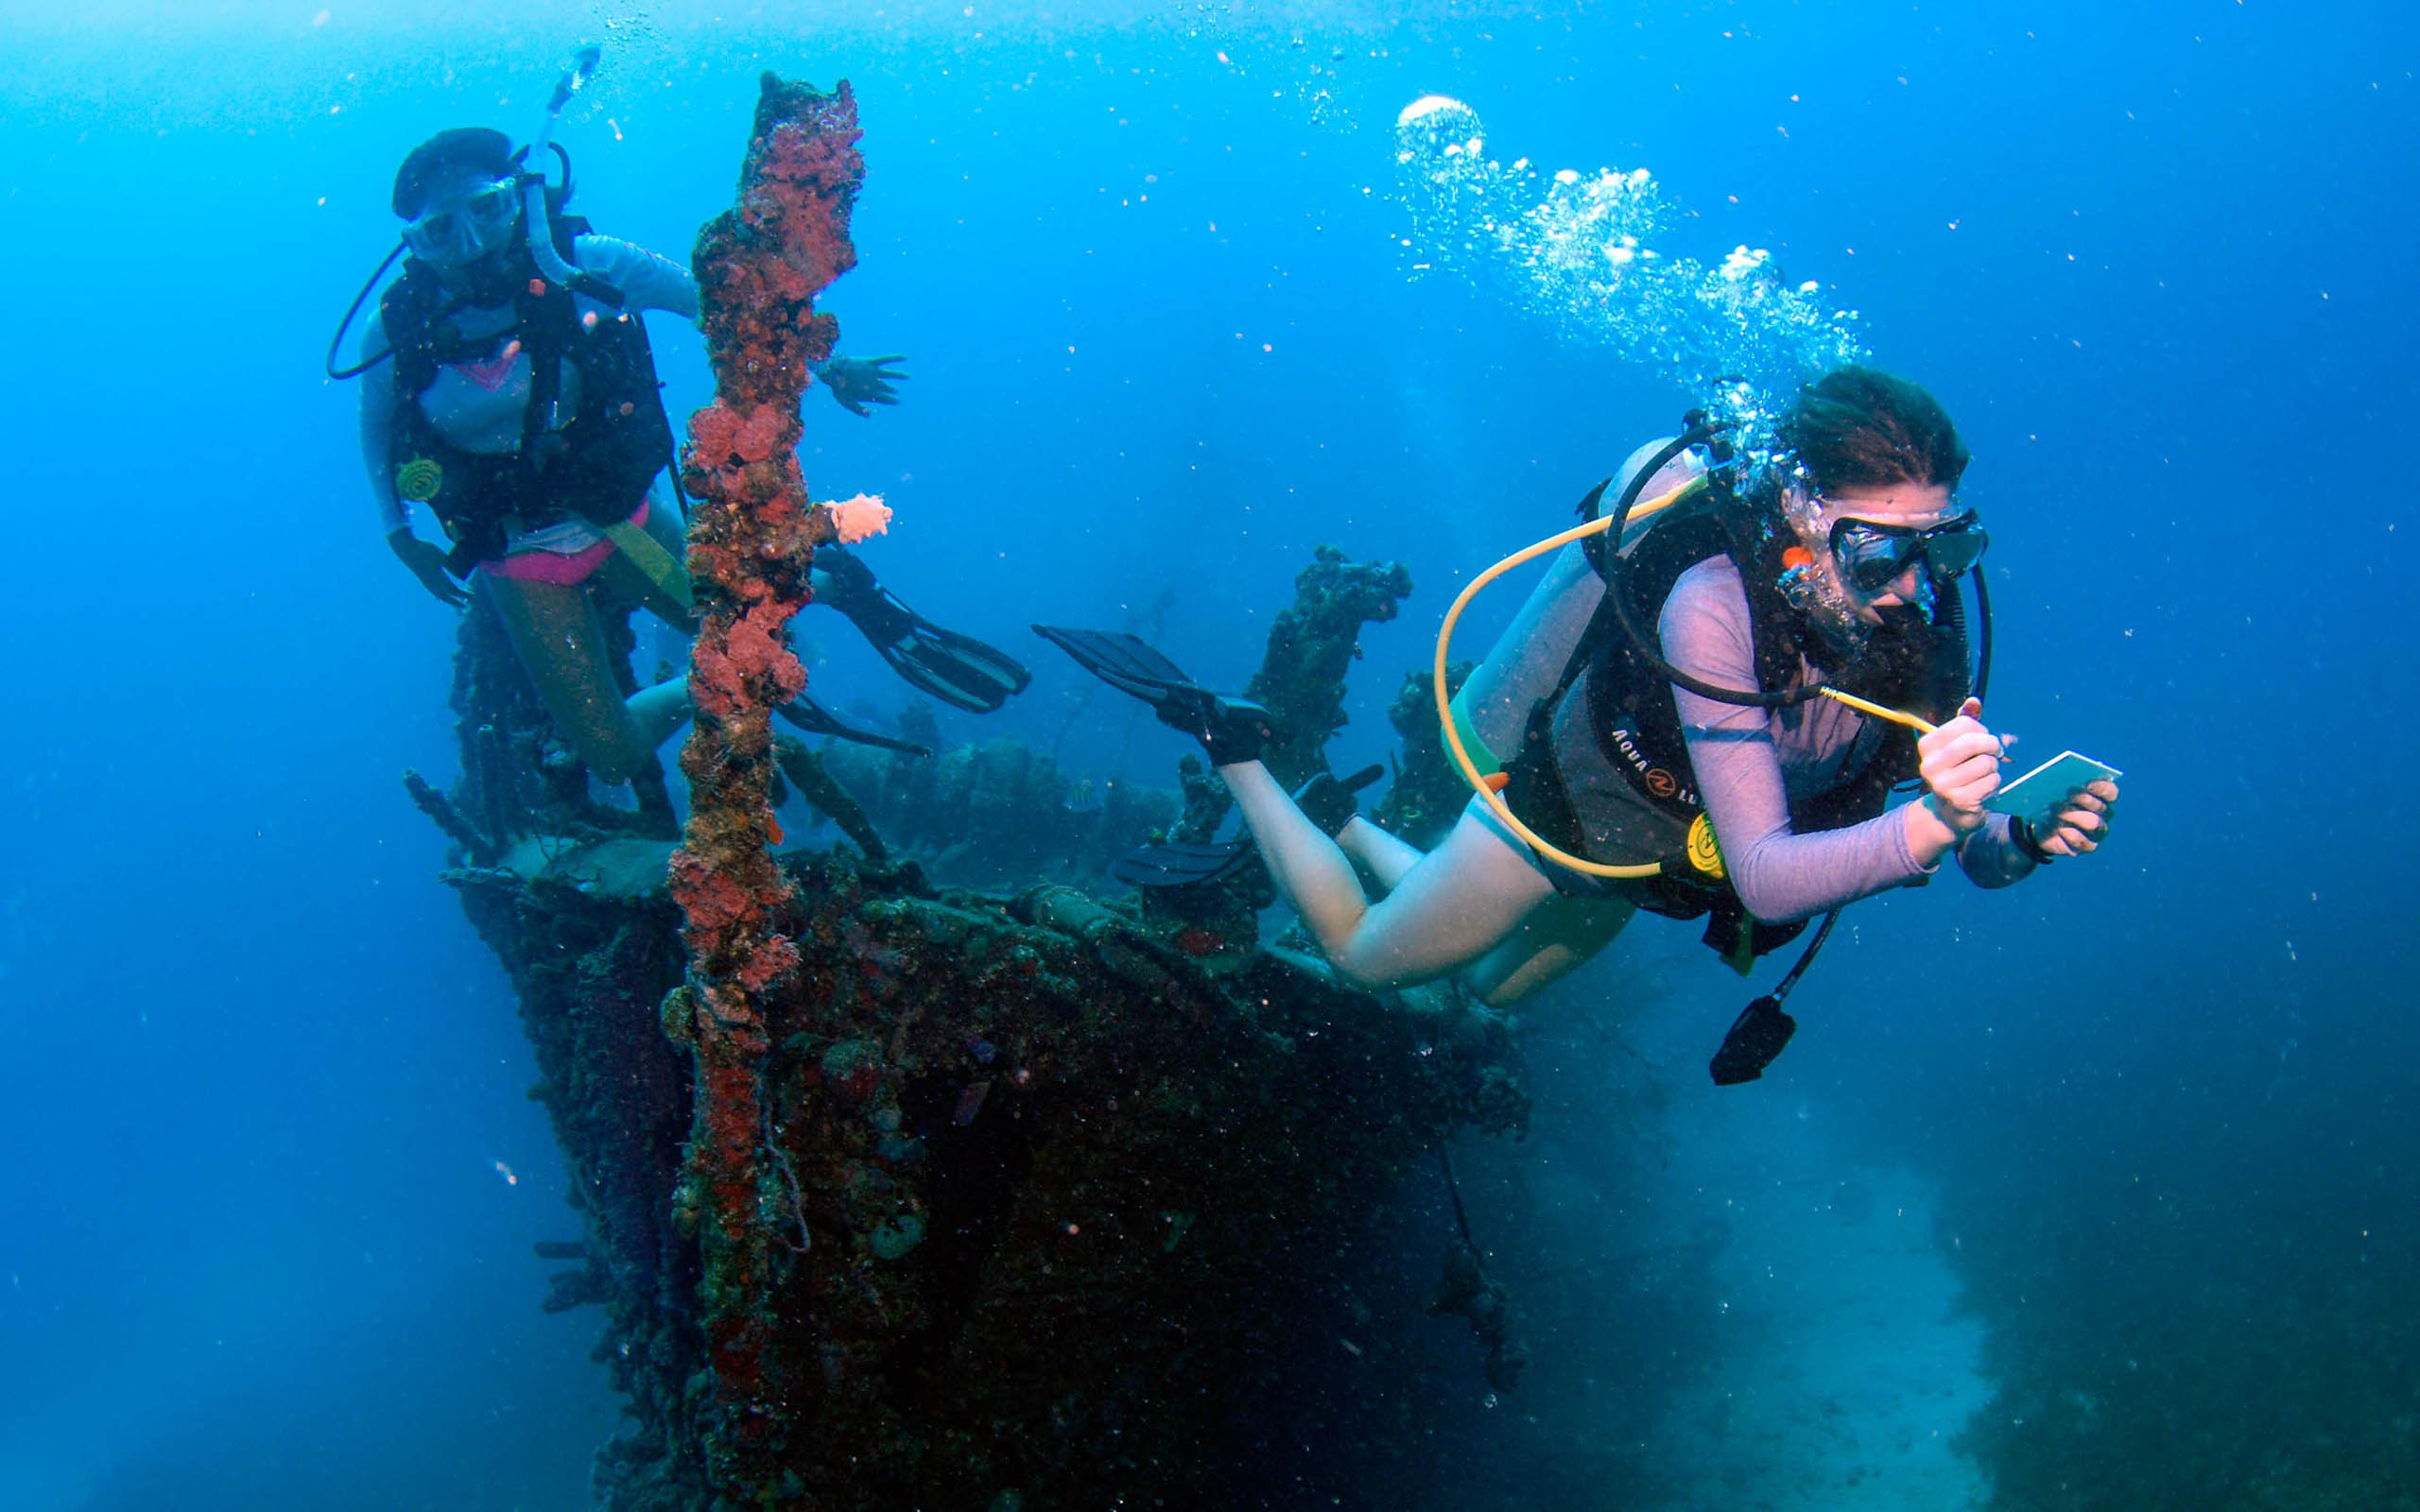 Two people scuba diving on an old ship.